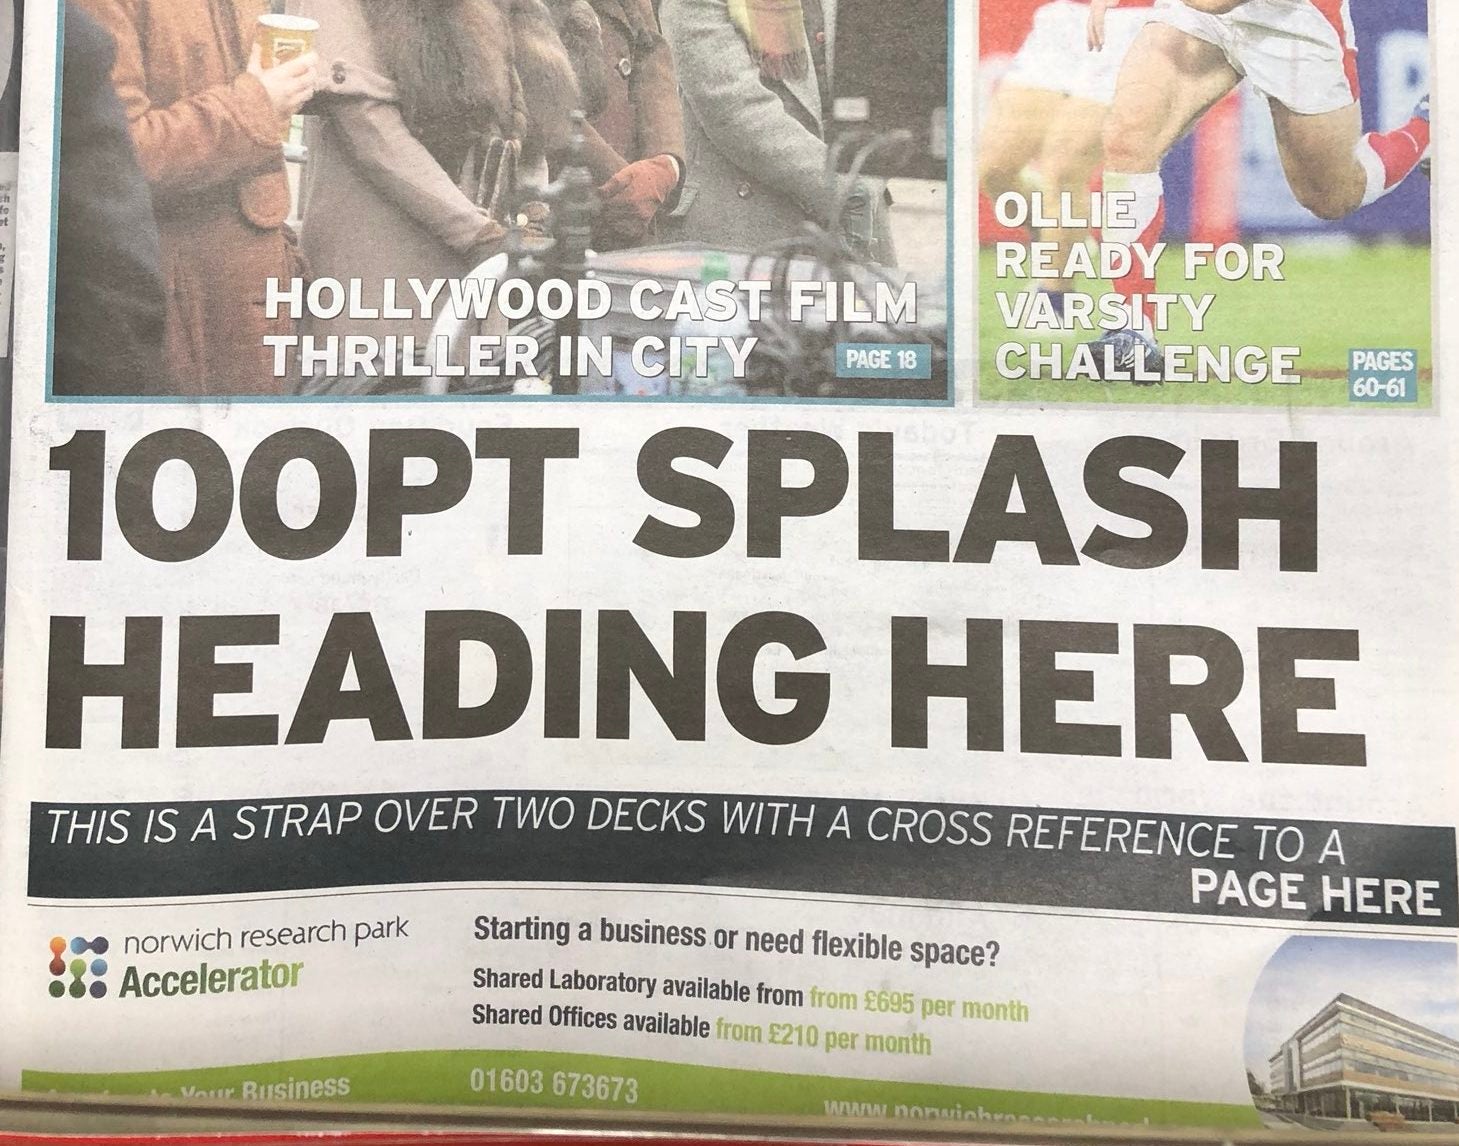 Cambridge News editor says sorry to readers over missing front page headline